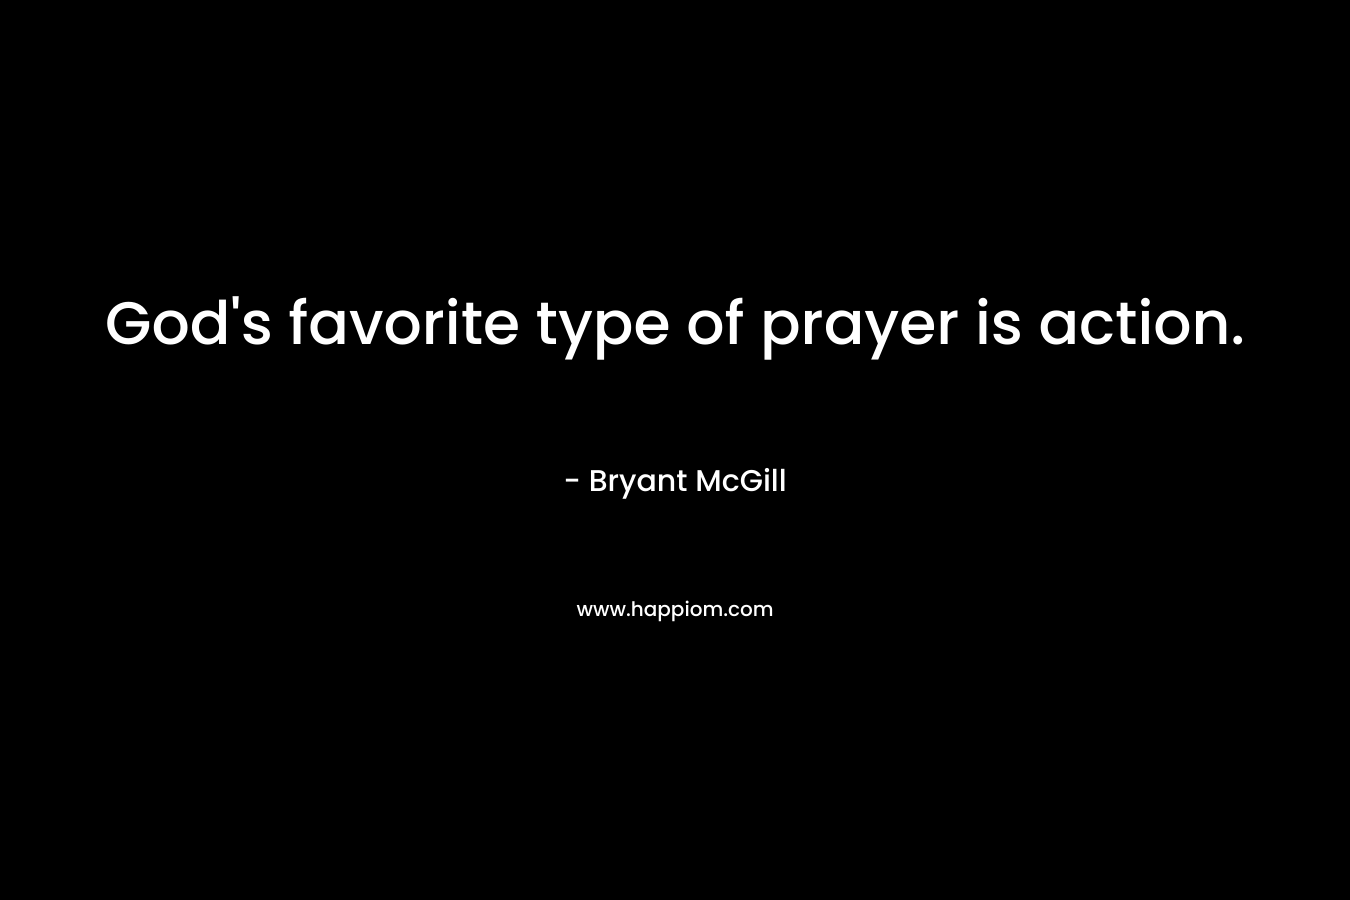 God's favorite type of prayer is action.